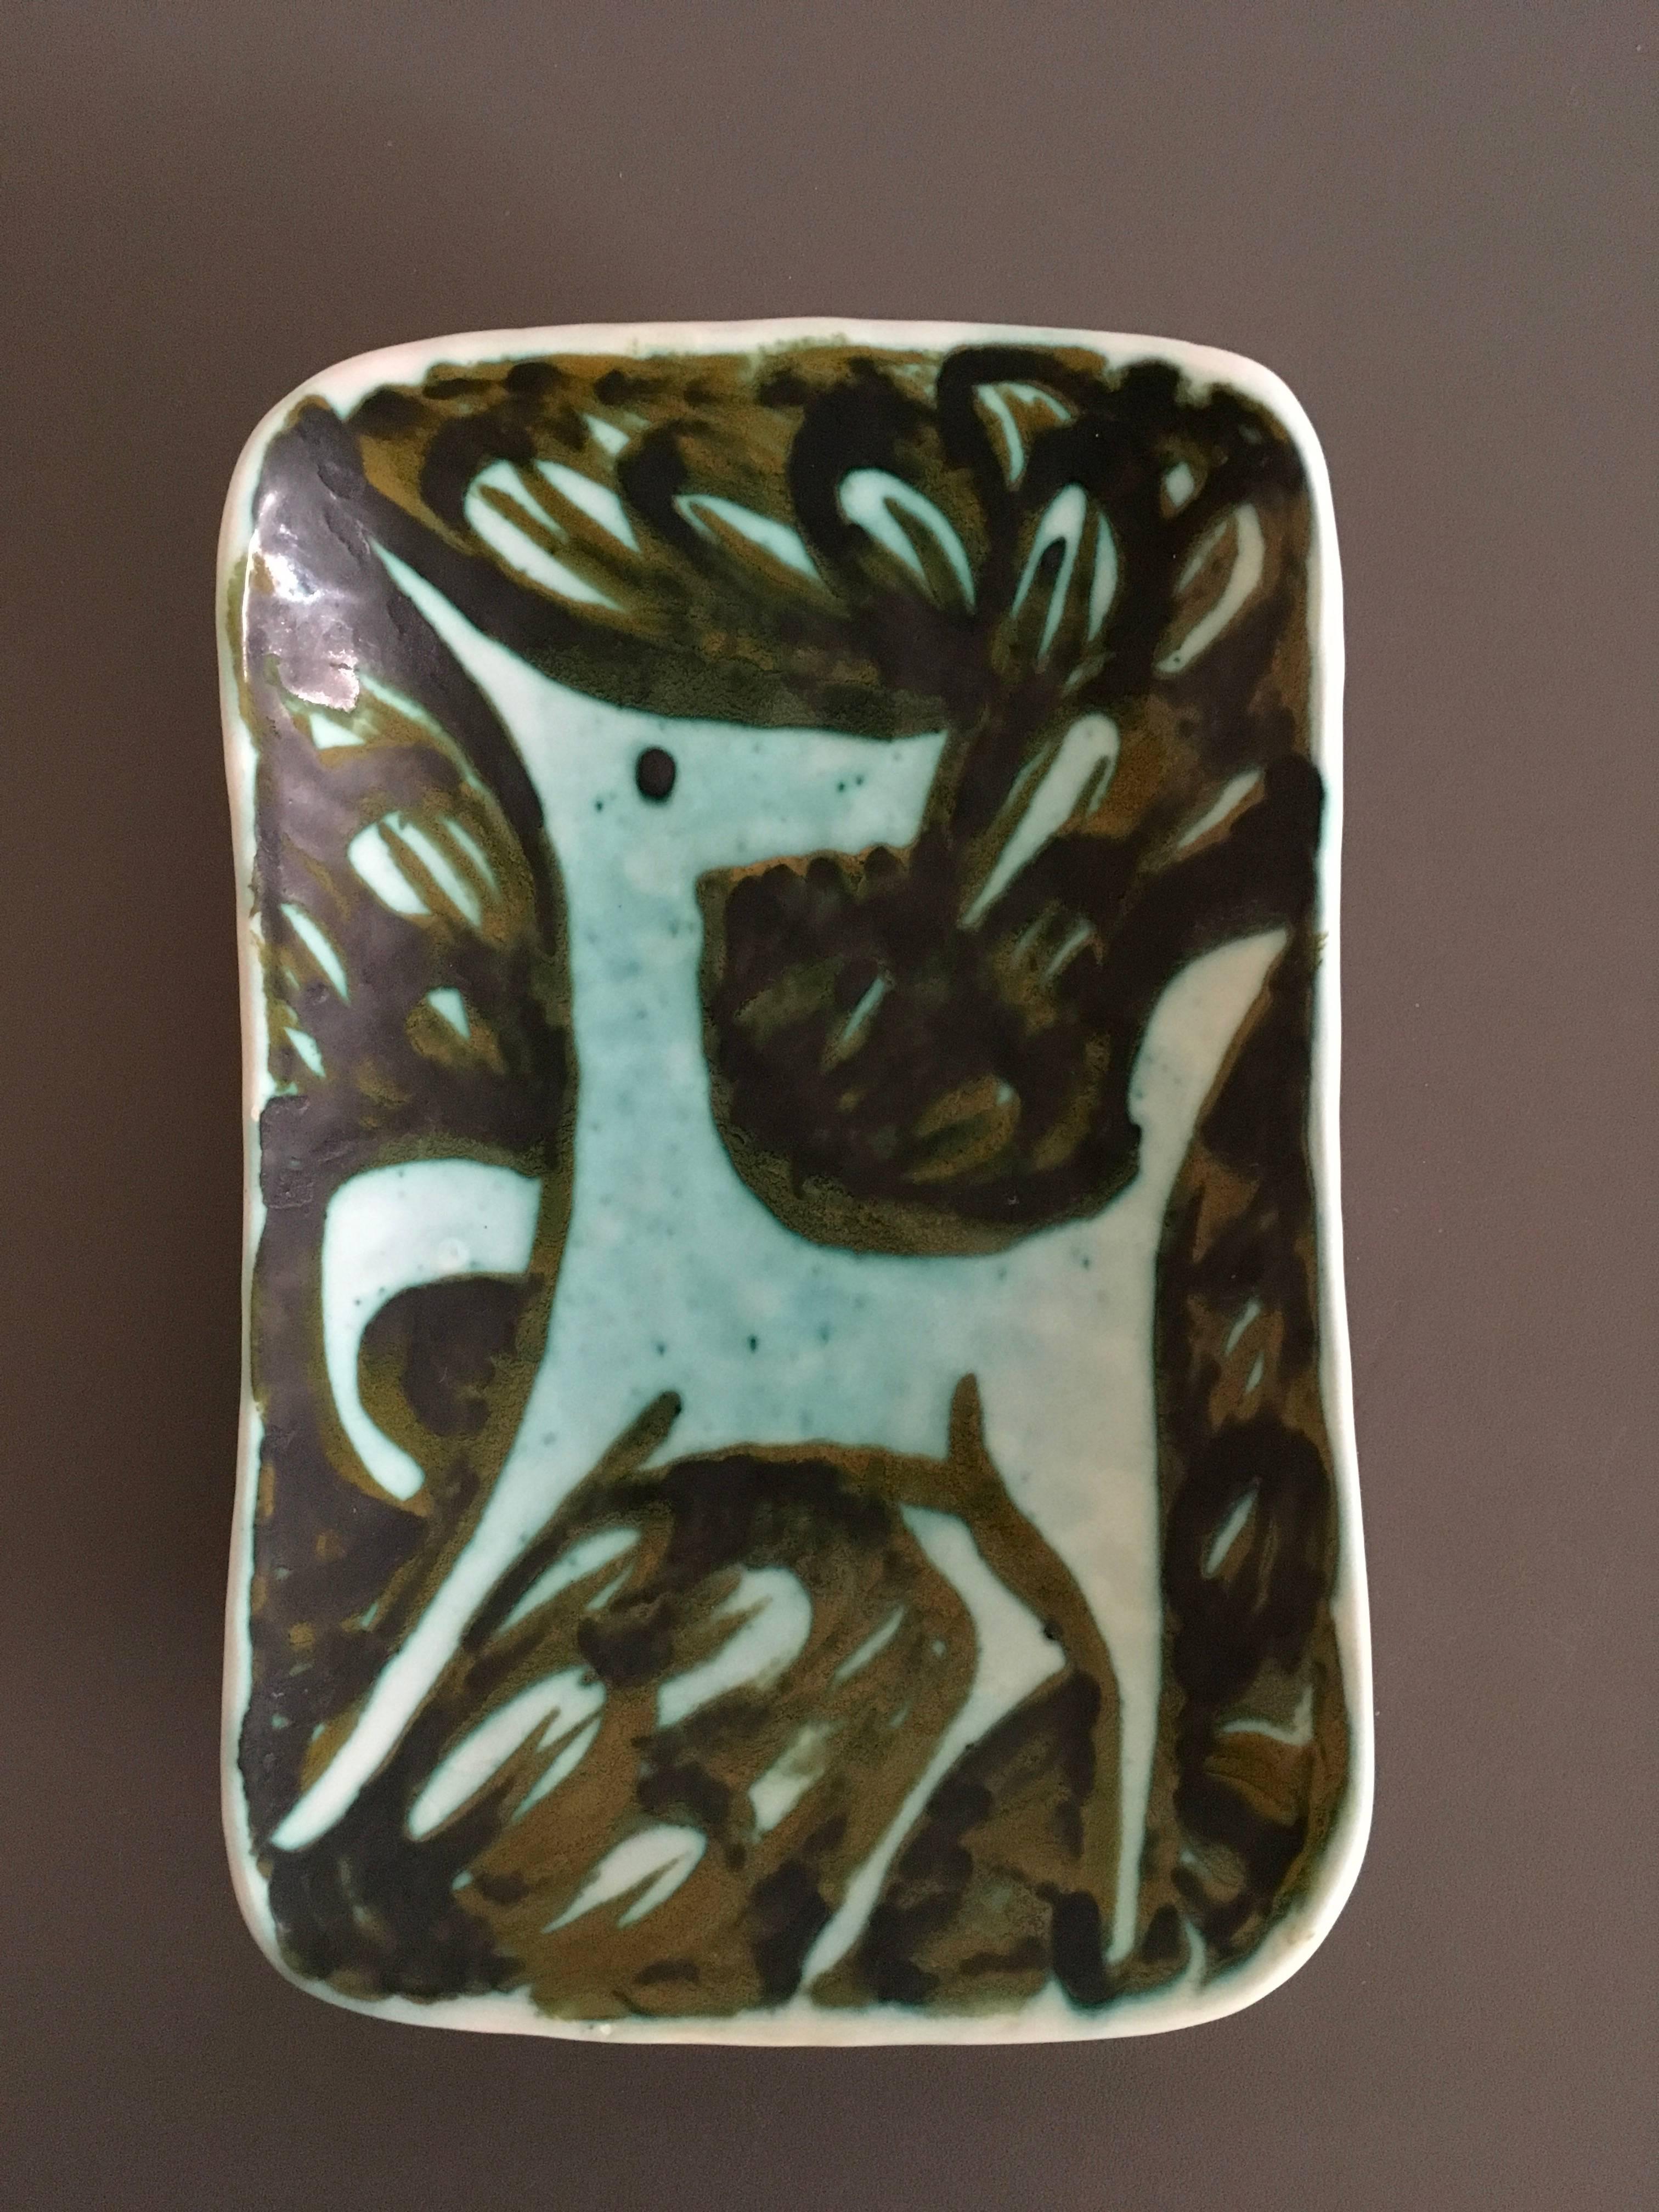 This original Alessio Tasca wall plate beautifully depicts a stylised horse surrounded by foliage in what became known as 'Morelli Green' glaze on a white ground. Tasca helped to develop the Morelli glaze - this particular Blue-Green with bronze